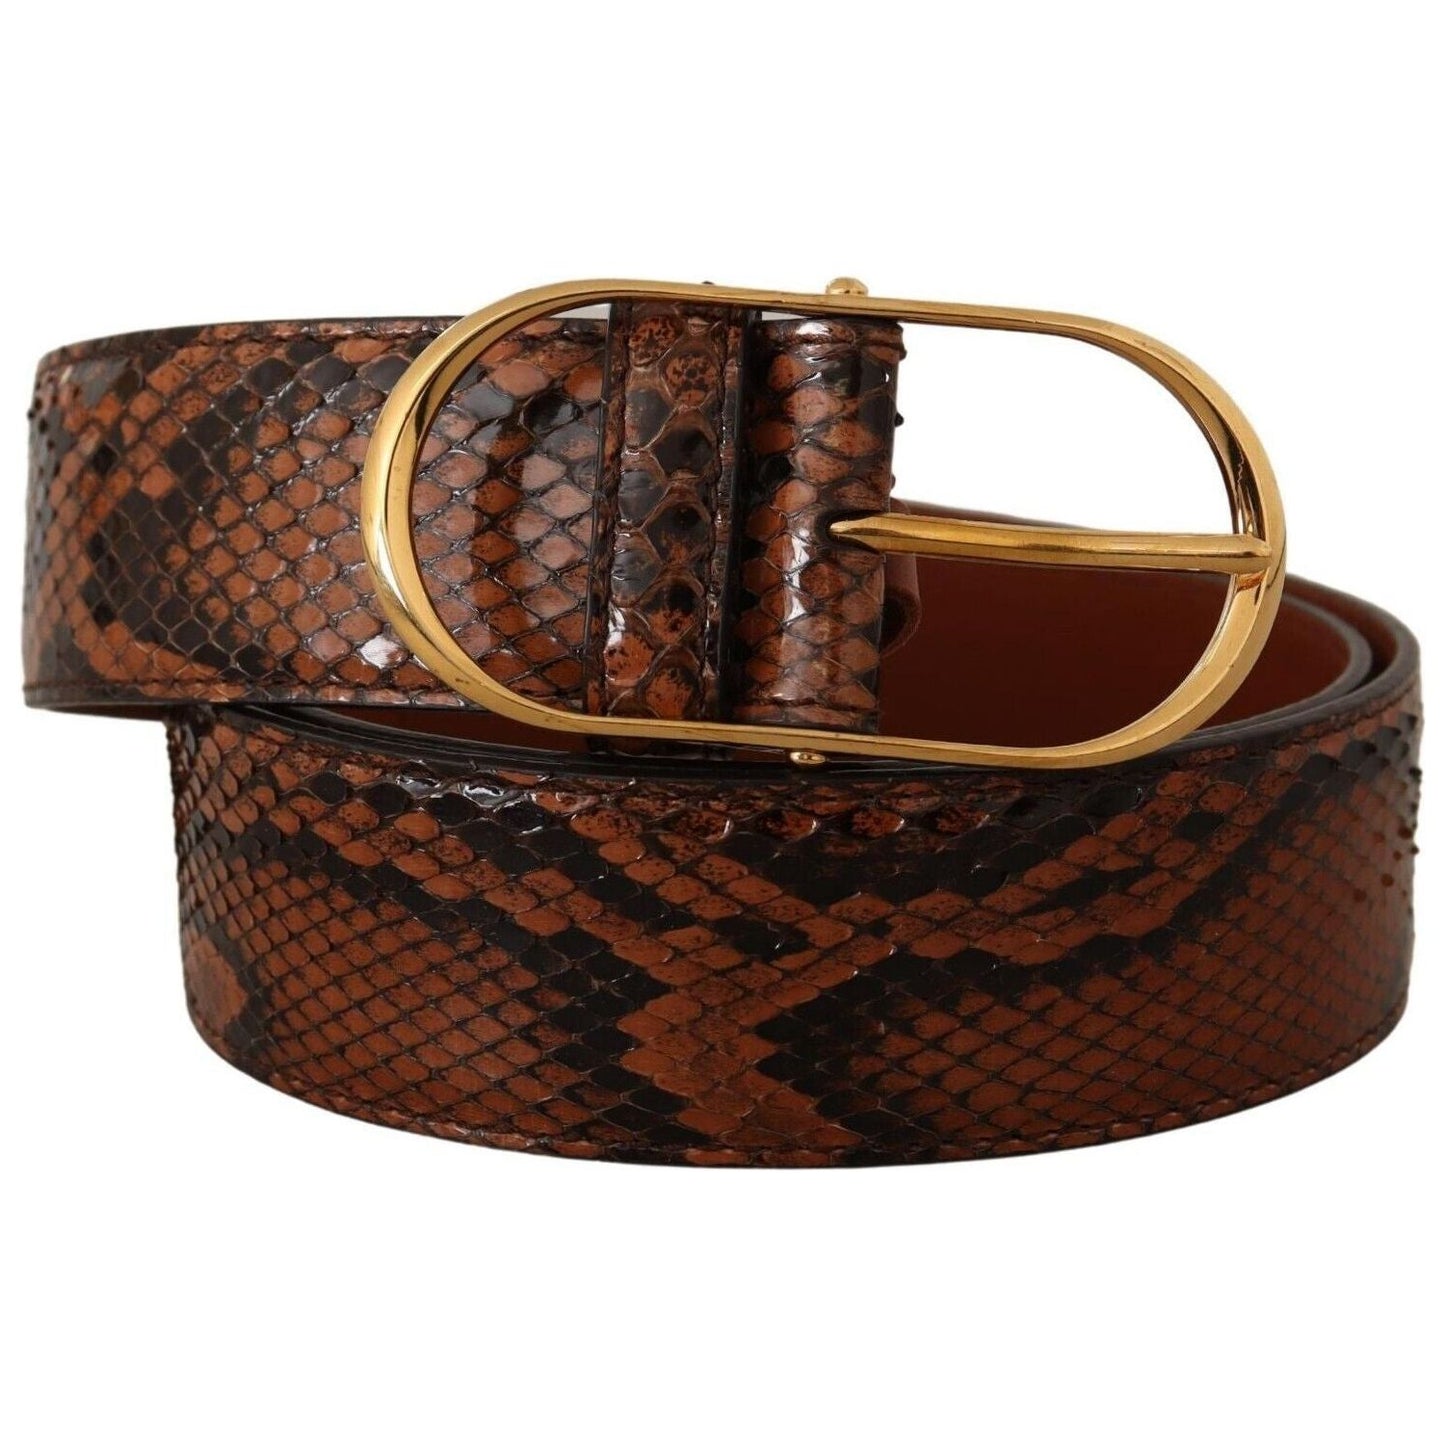 Dolce & Gabbana Elegant Leather Belt with Gold Buckle brown-exotic-leather-gold-oval-buckle-belt-7 s-l1600-1-286-8c1c6239-220.jpg